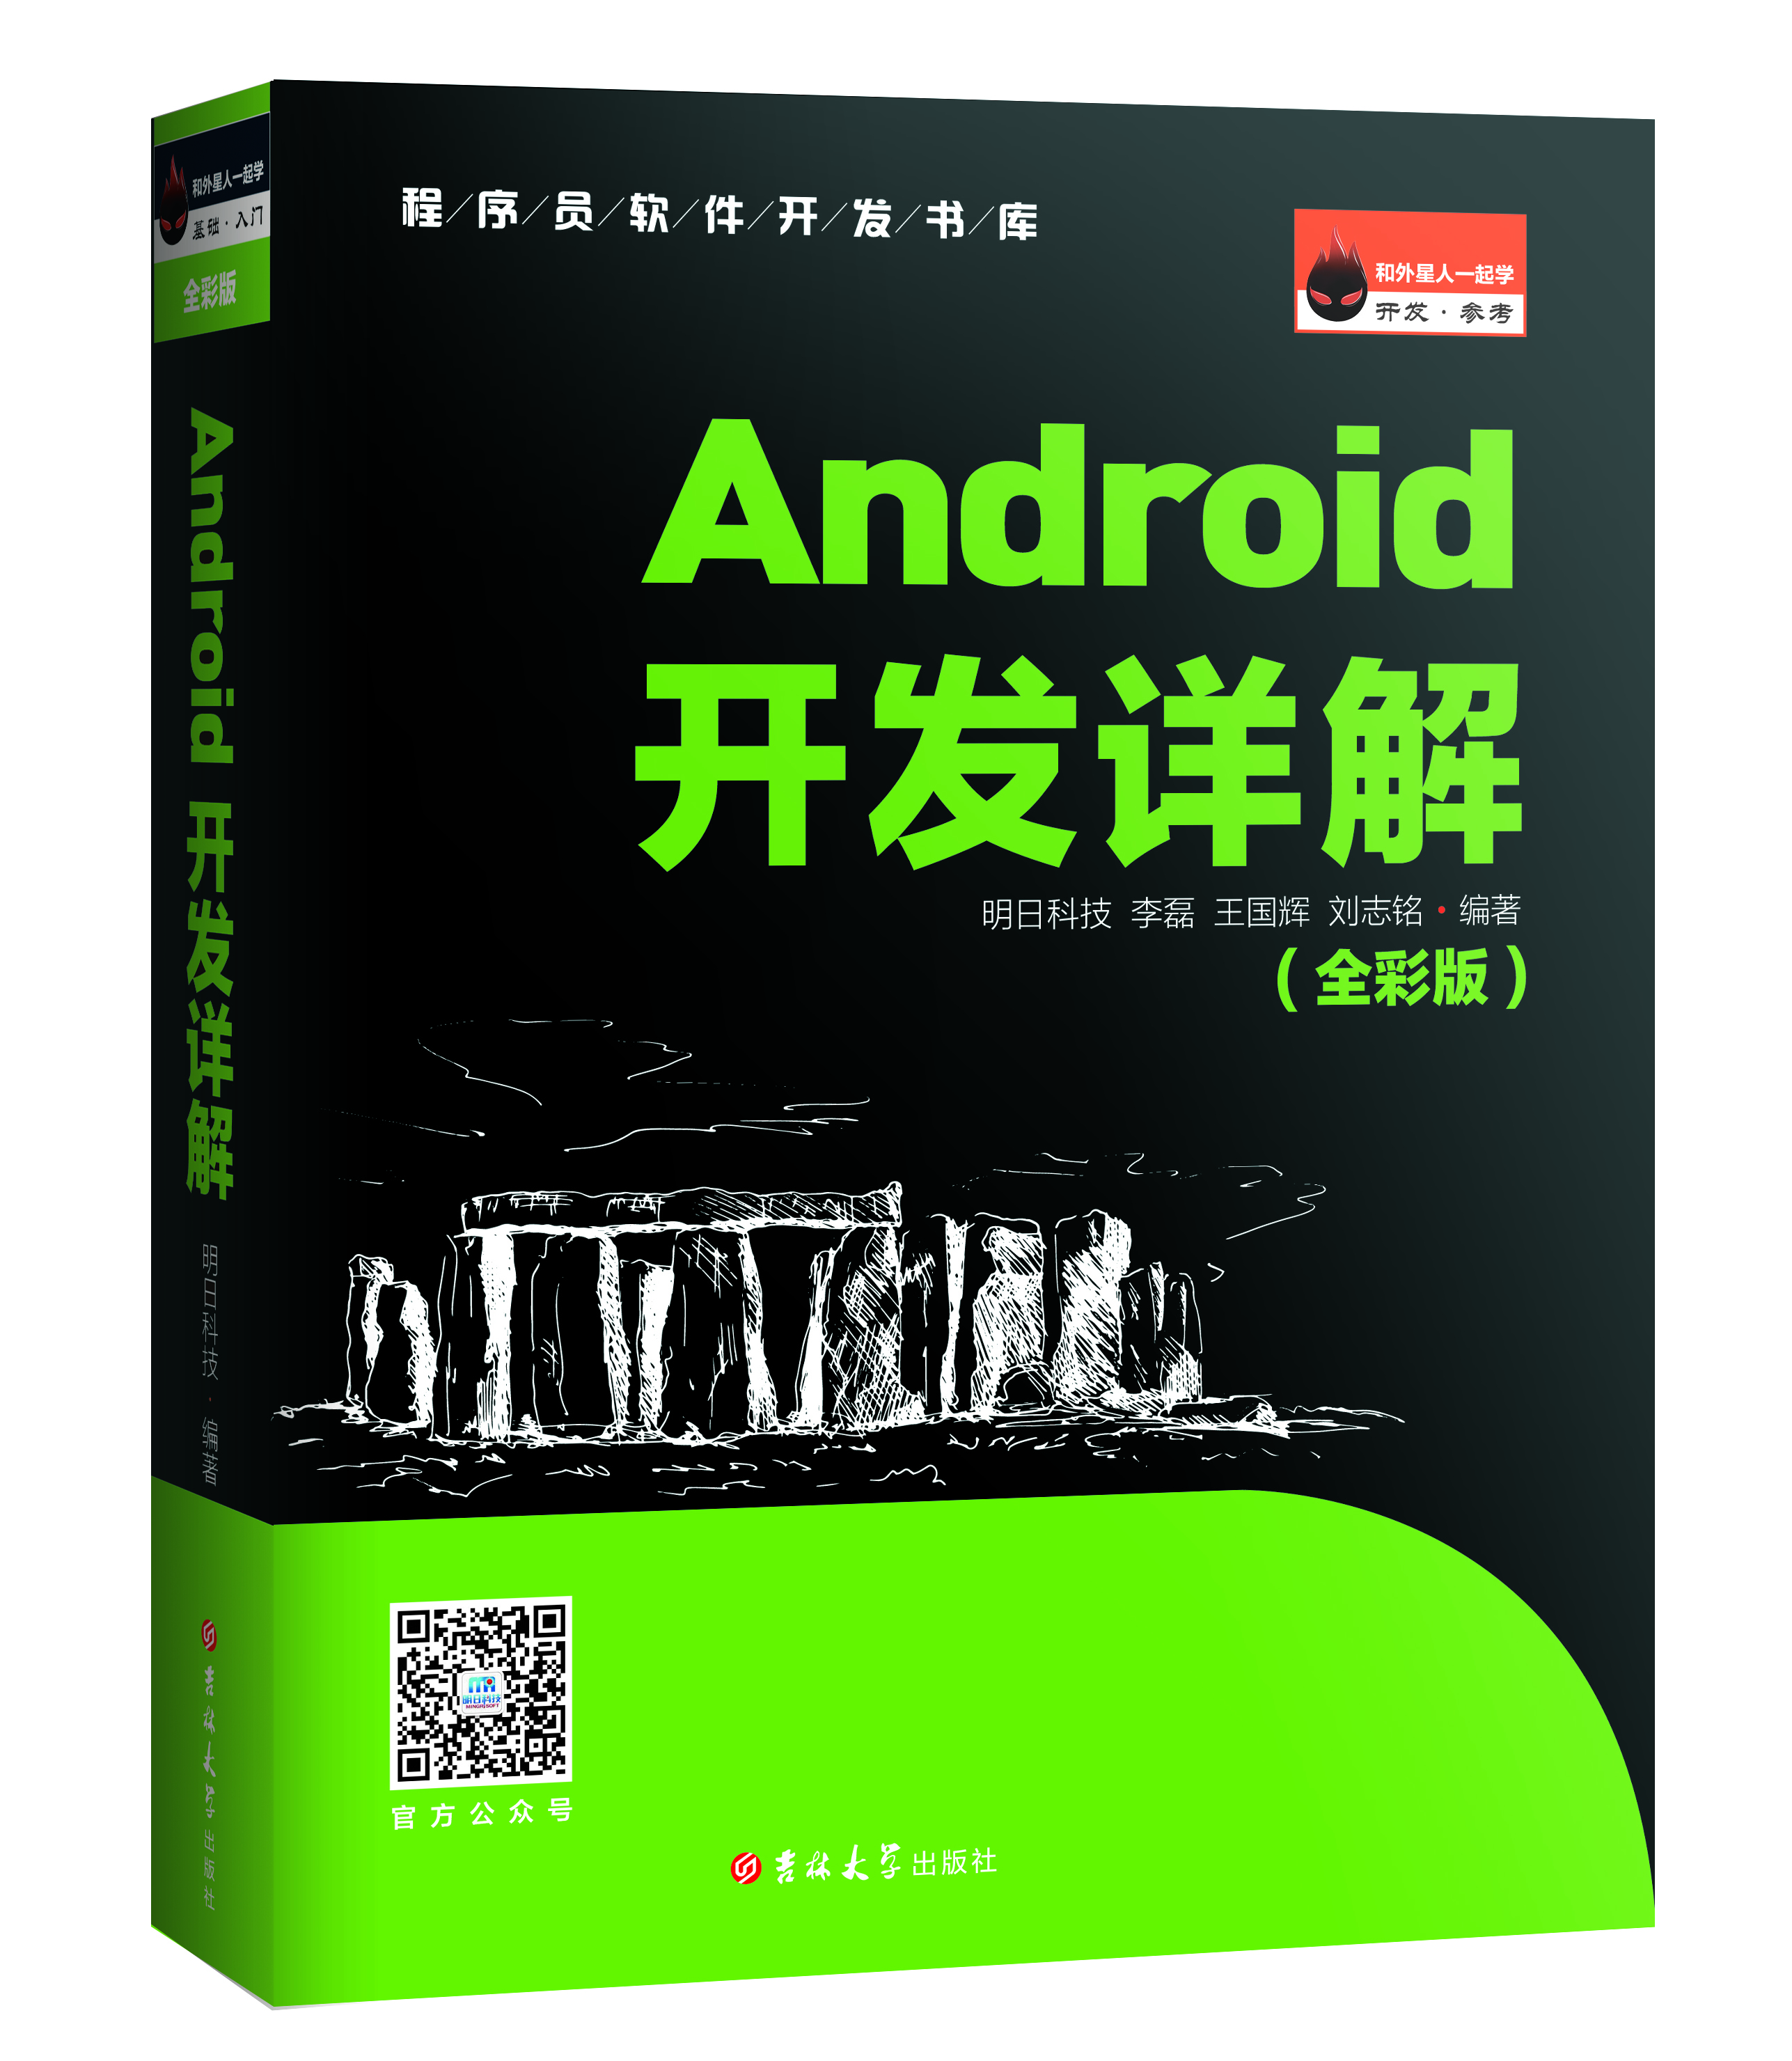 Android開發詳解